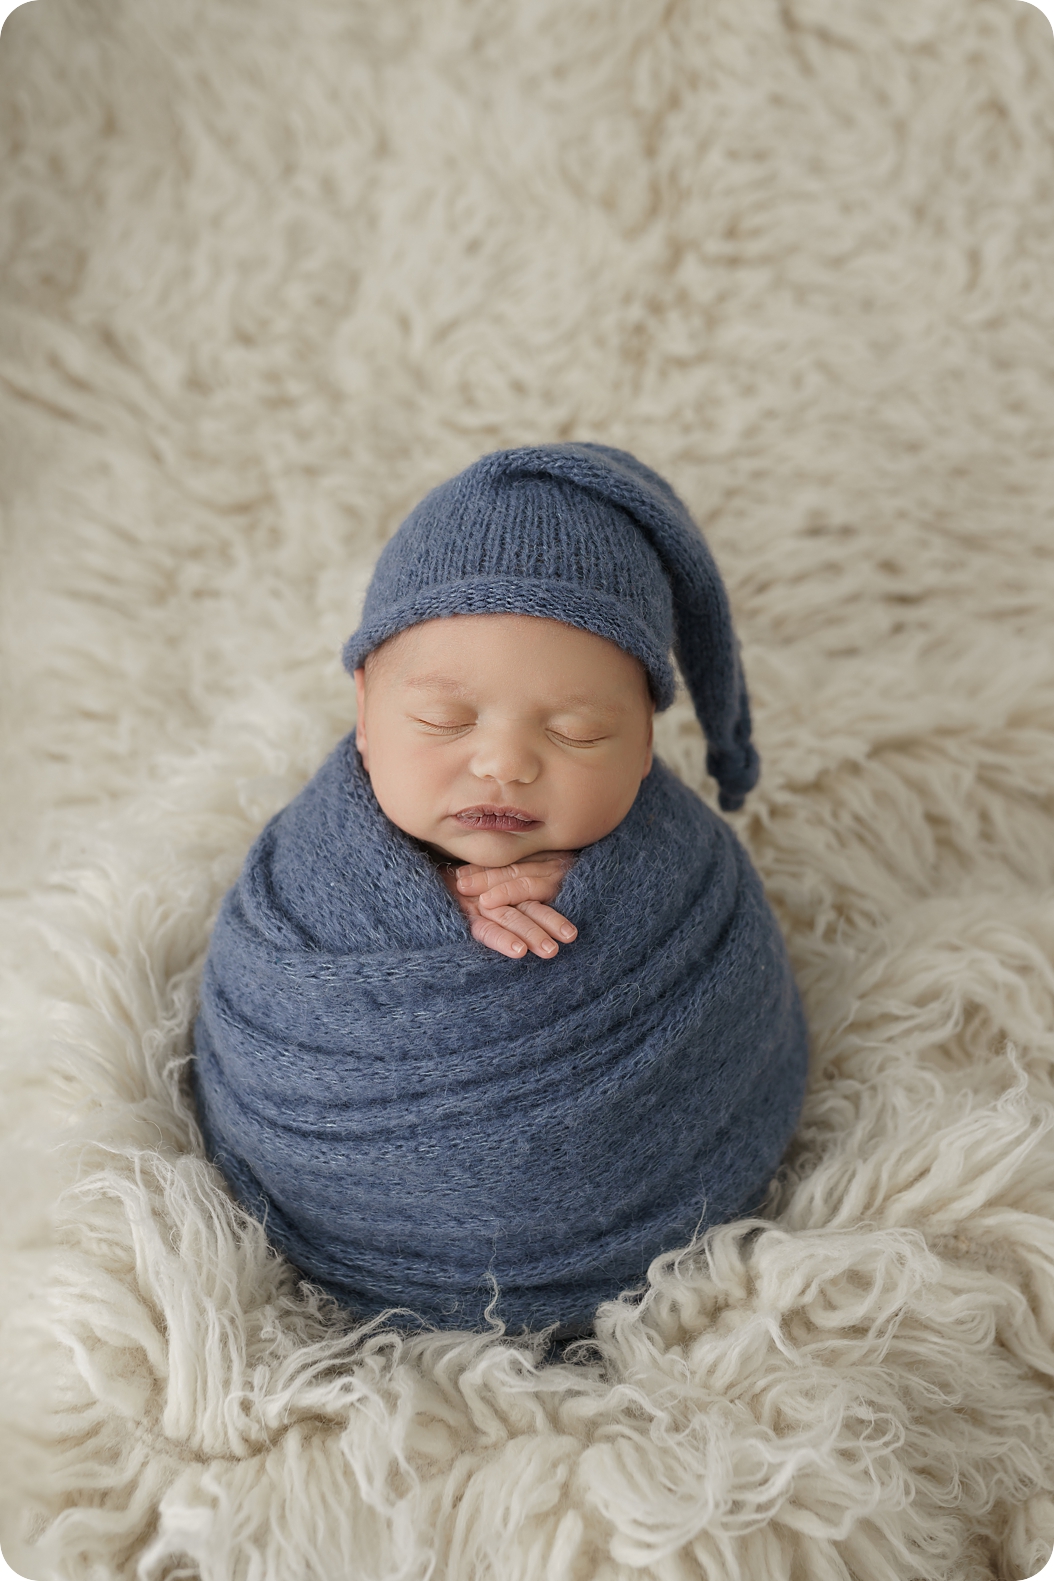 baby in blue wrap and blue knit cap sleeps during newborn photos with Beka Price Photography